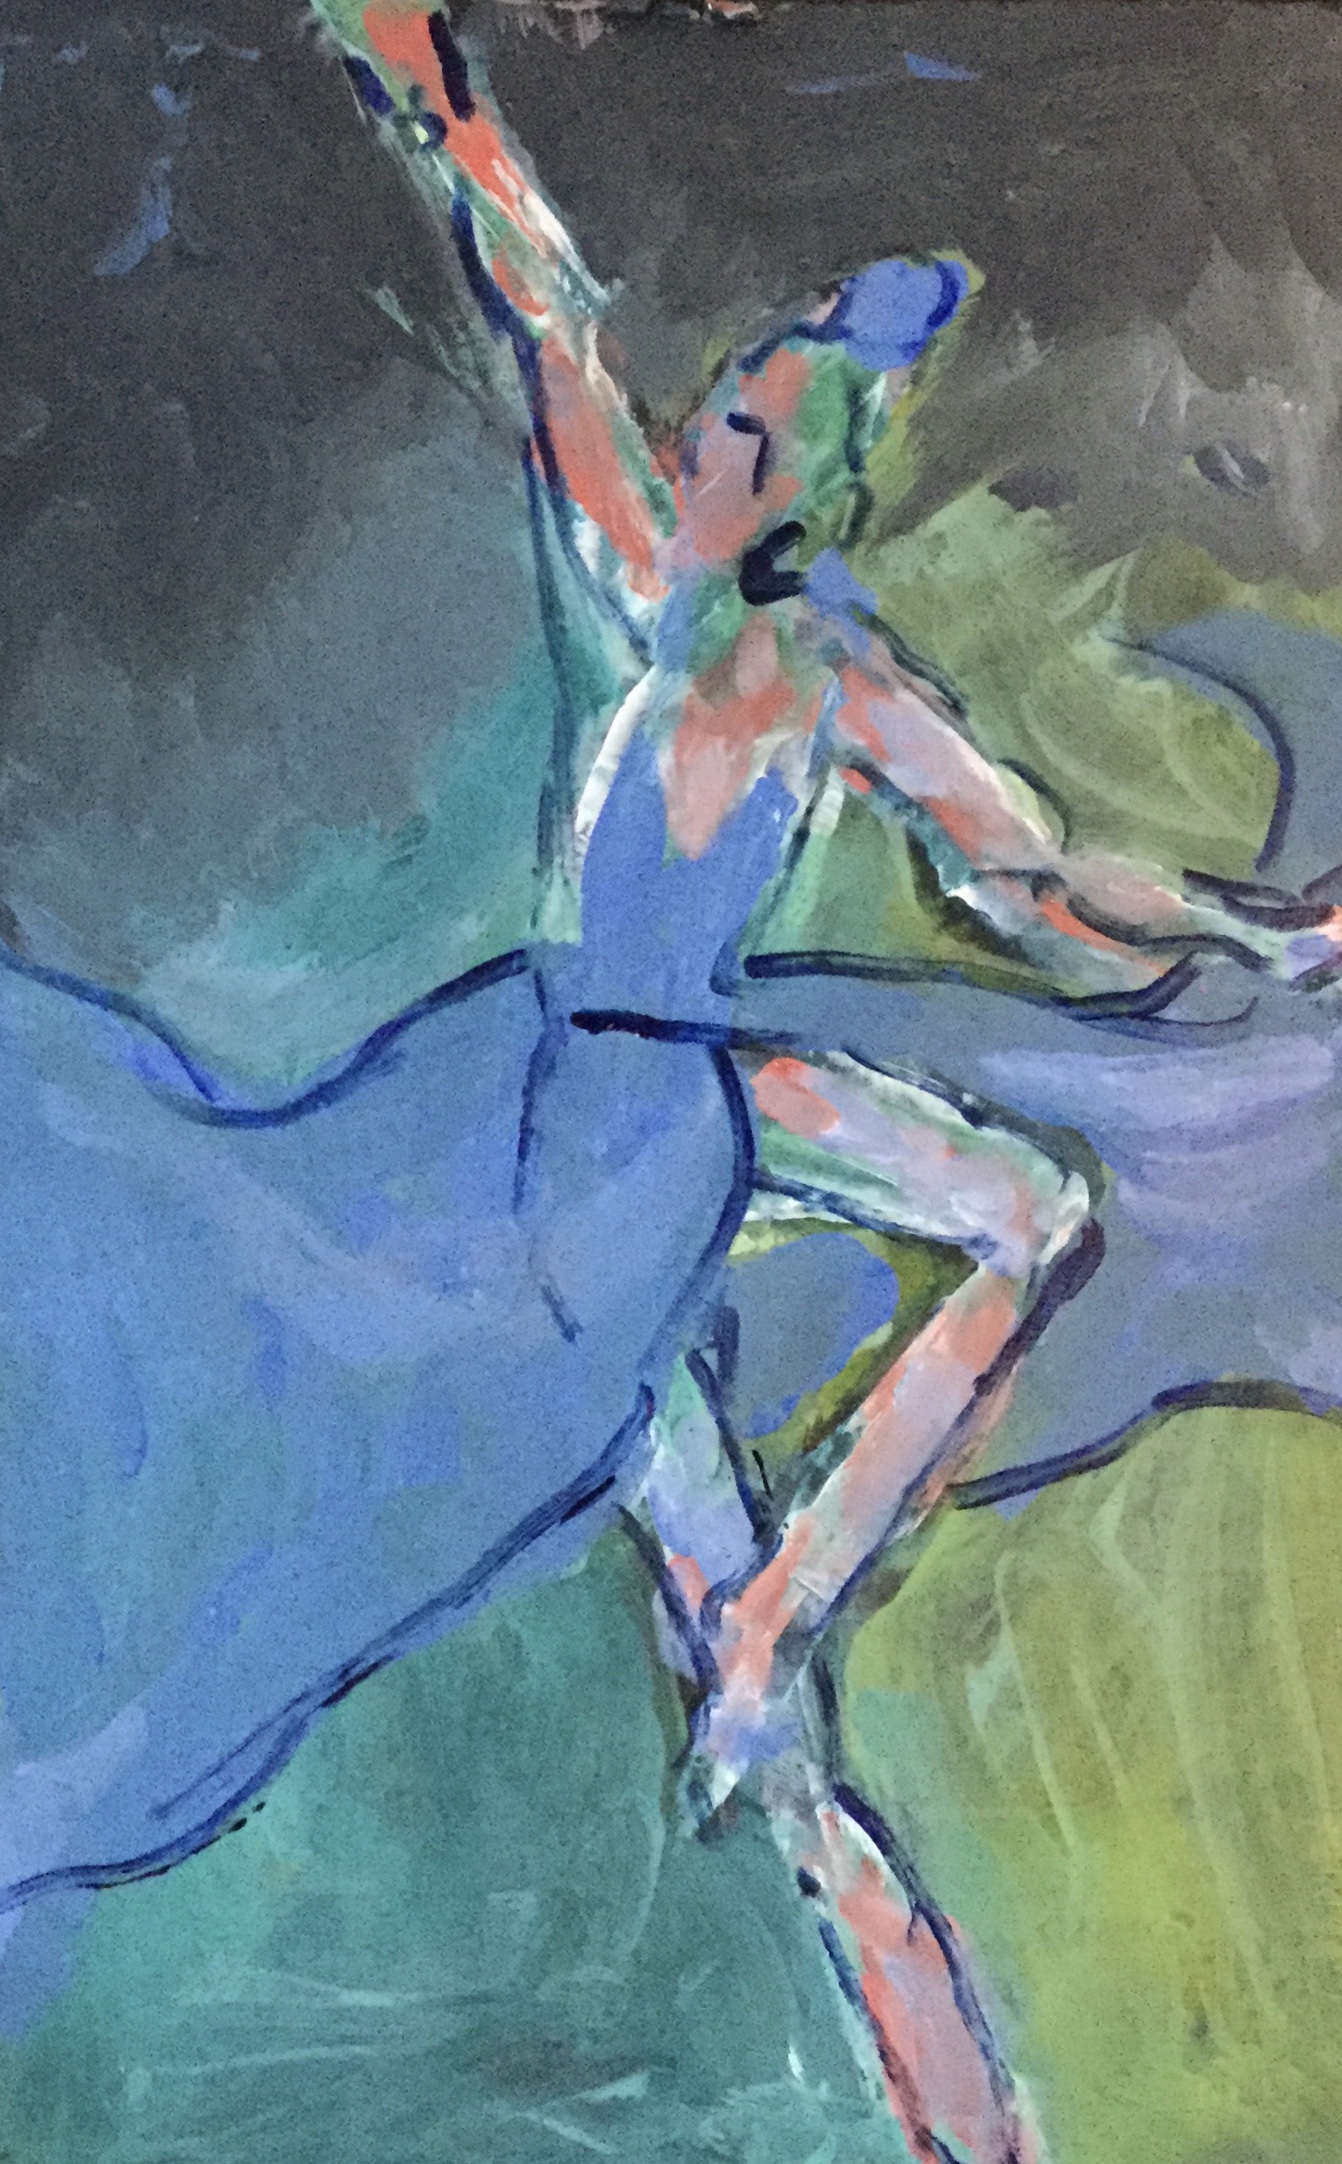 An abstract painting of a dancer's figure